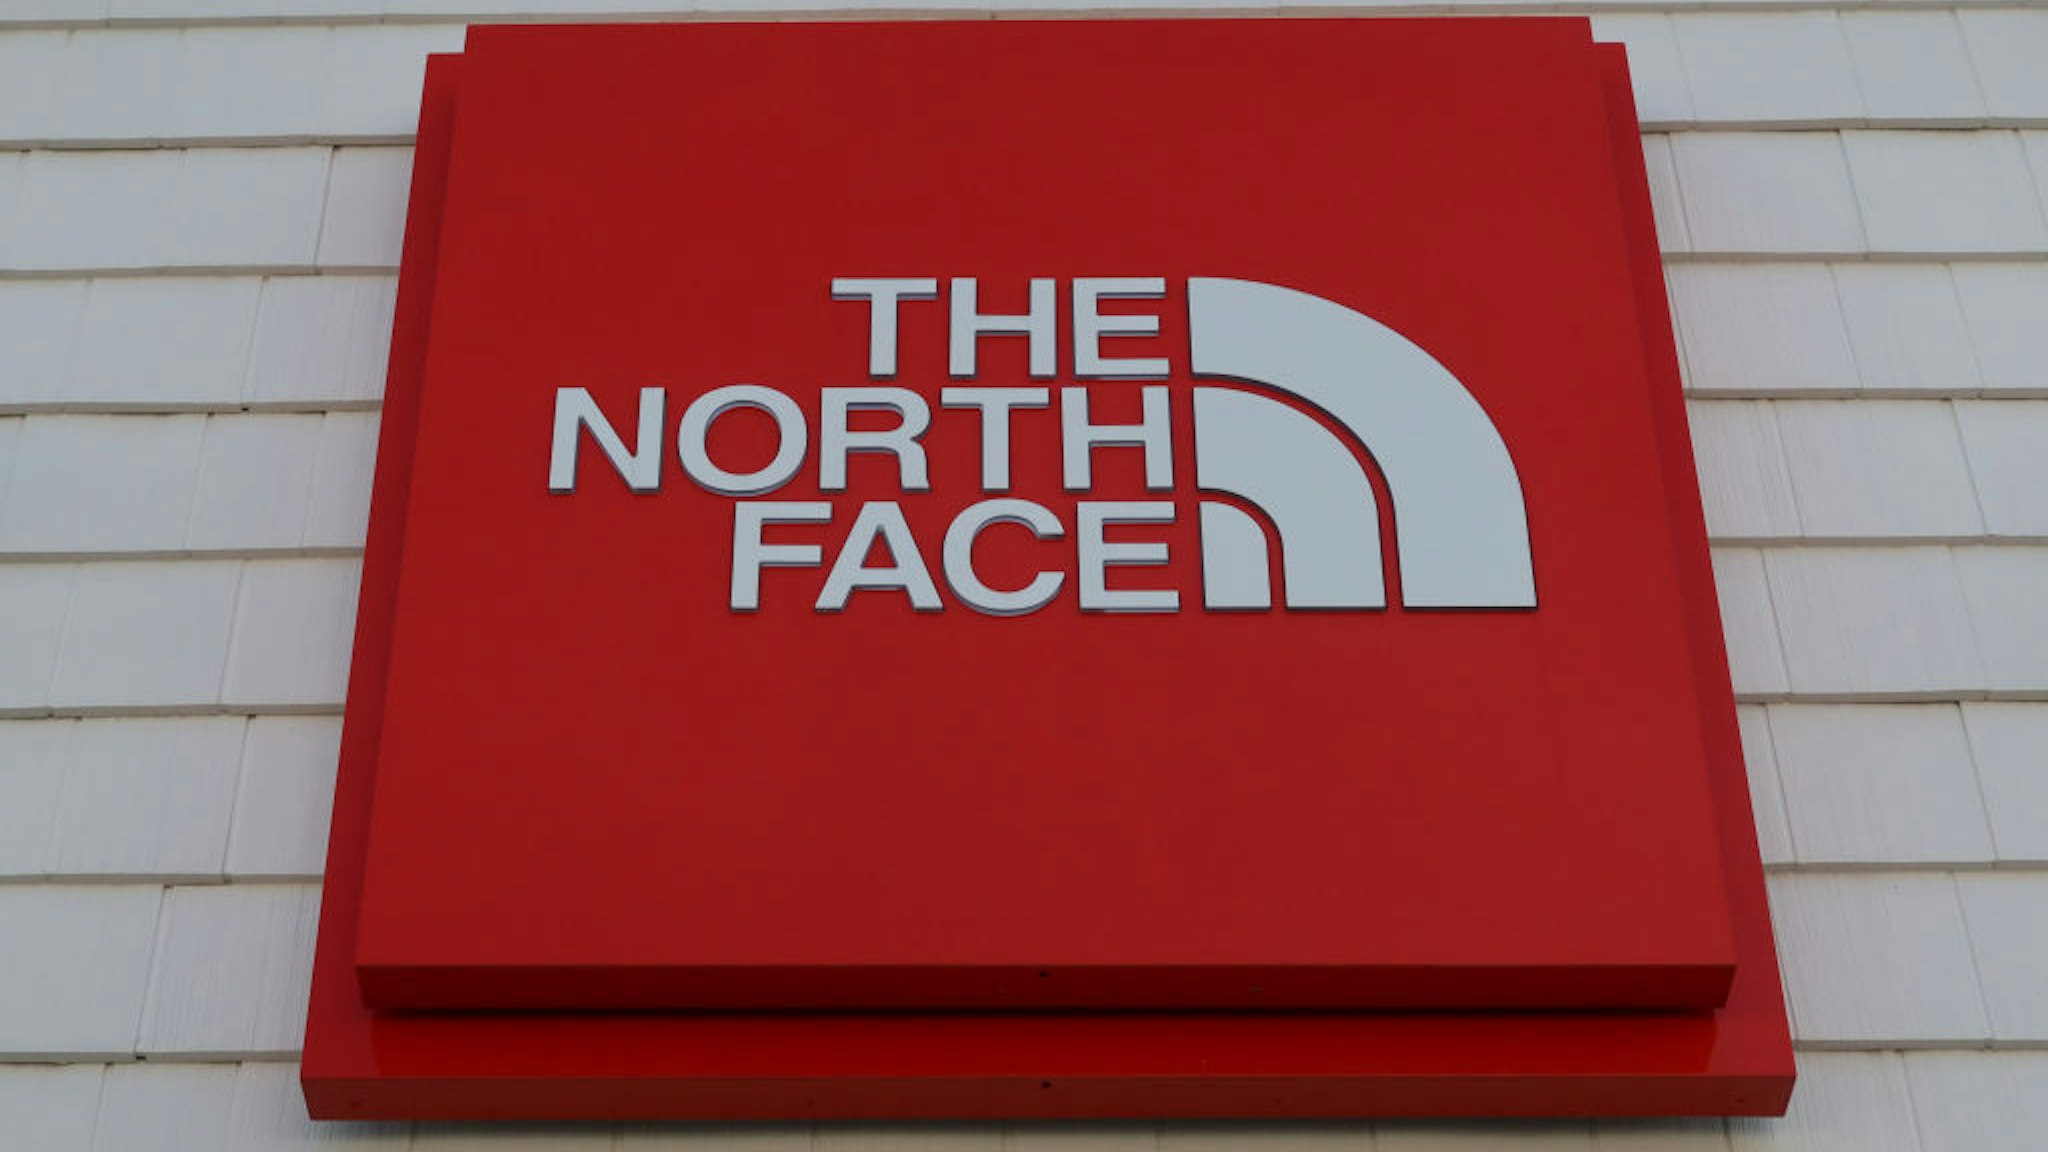 A The North Face sign hangs in front of their store at the Woodbury Common Premium Outlets shopping mall on November 24, 2020 in Central Valley, New York.